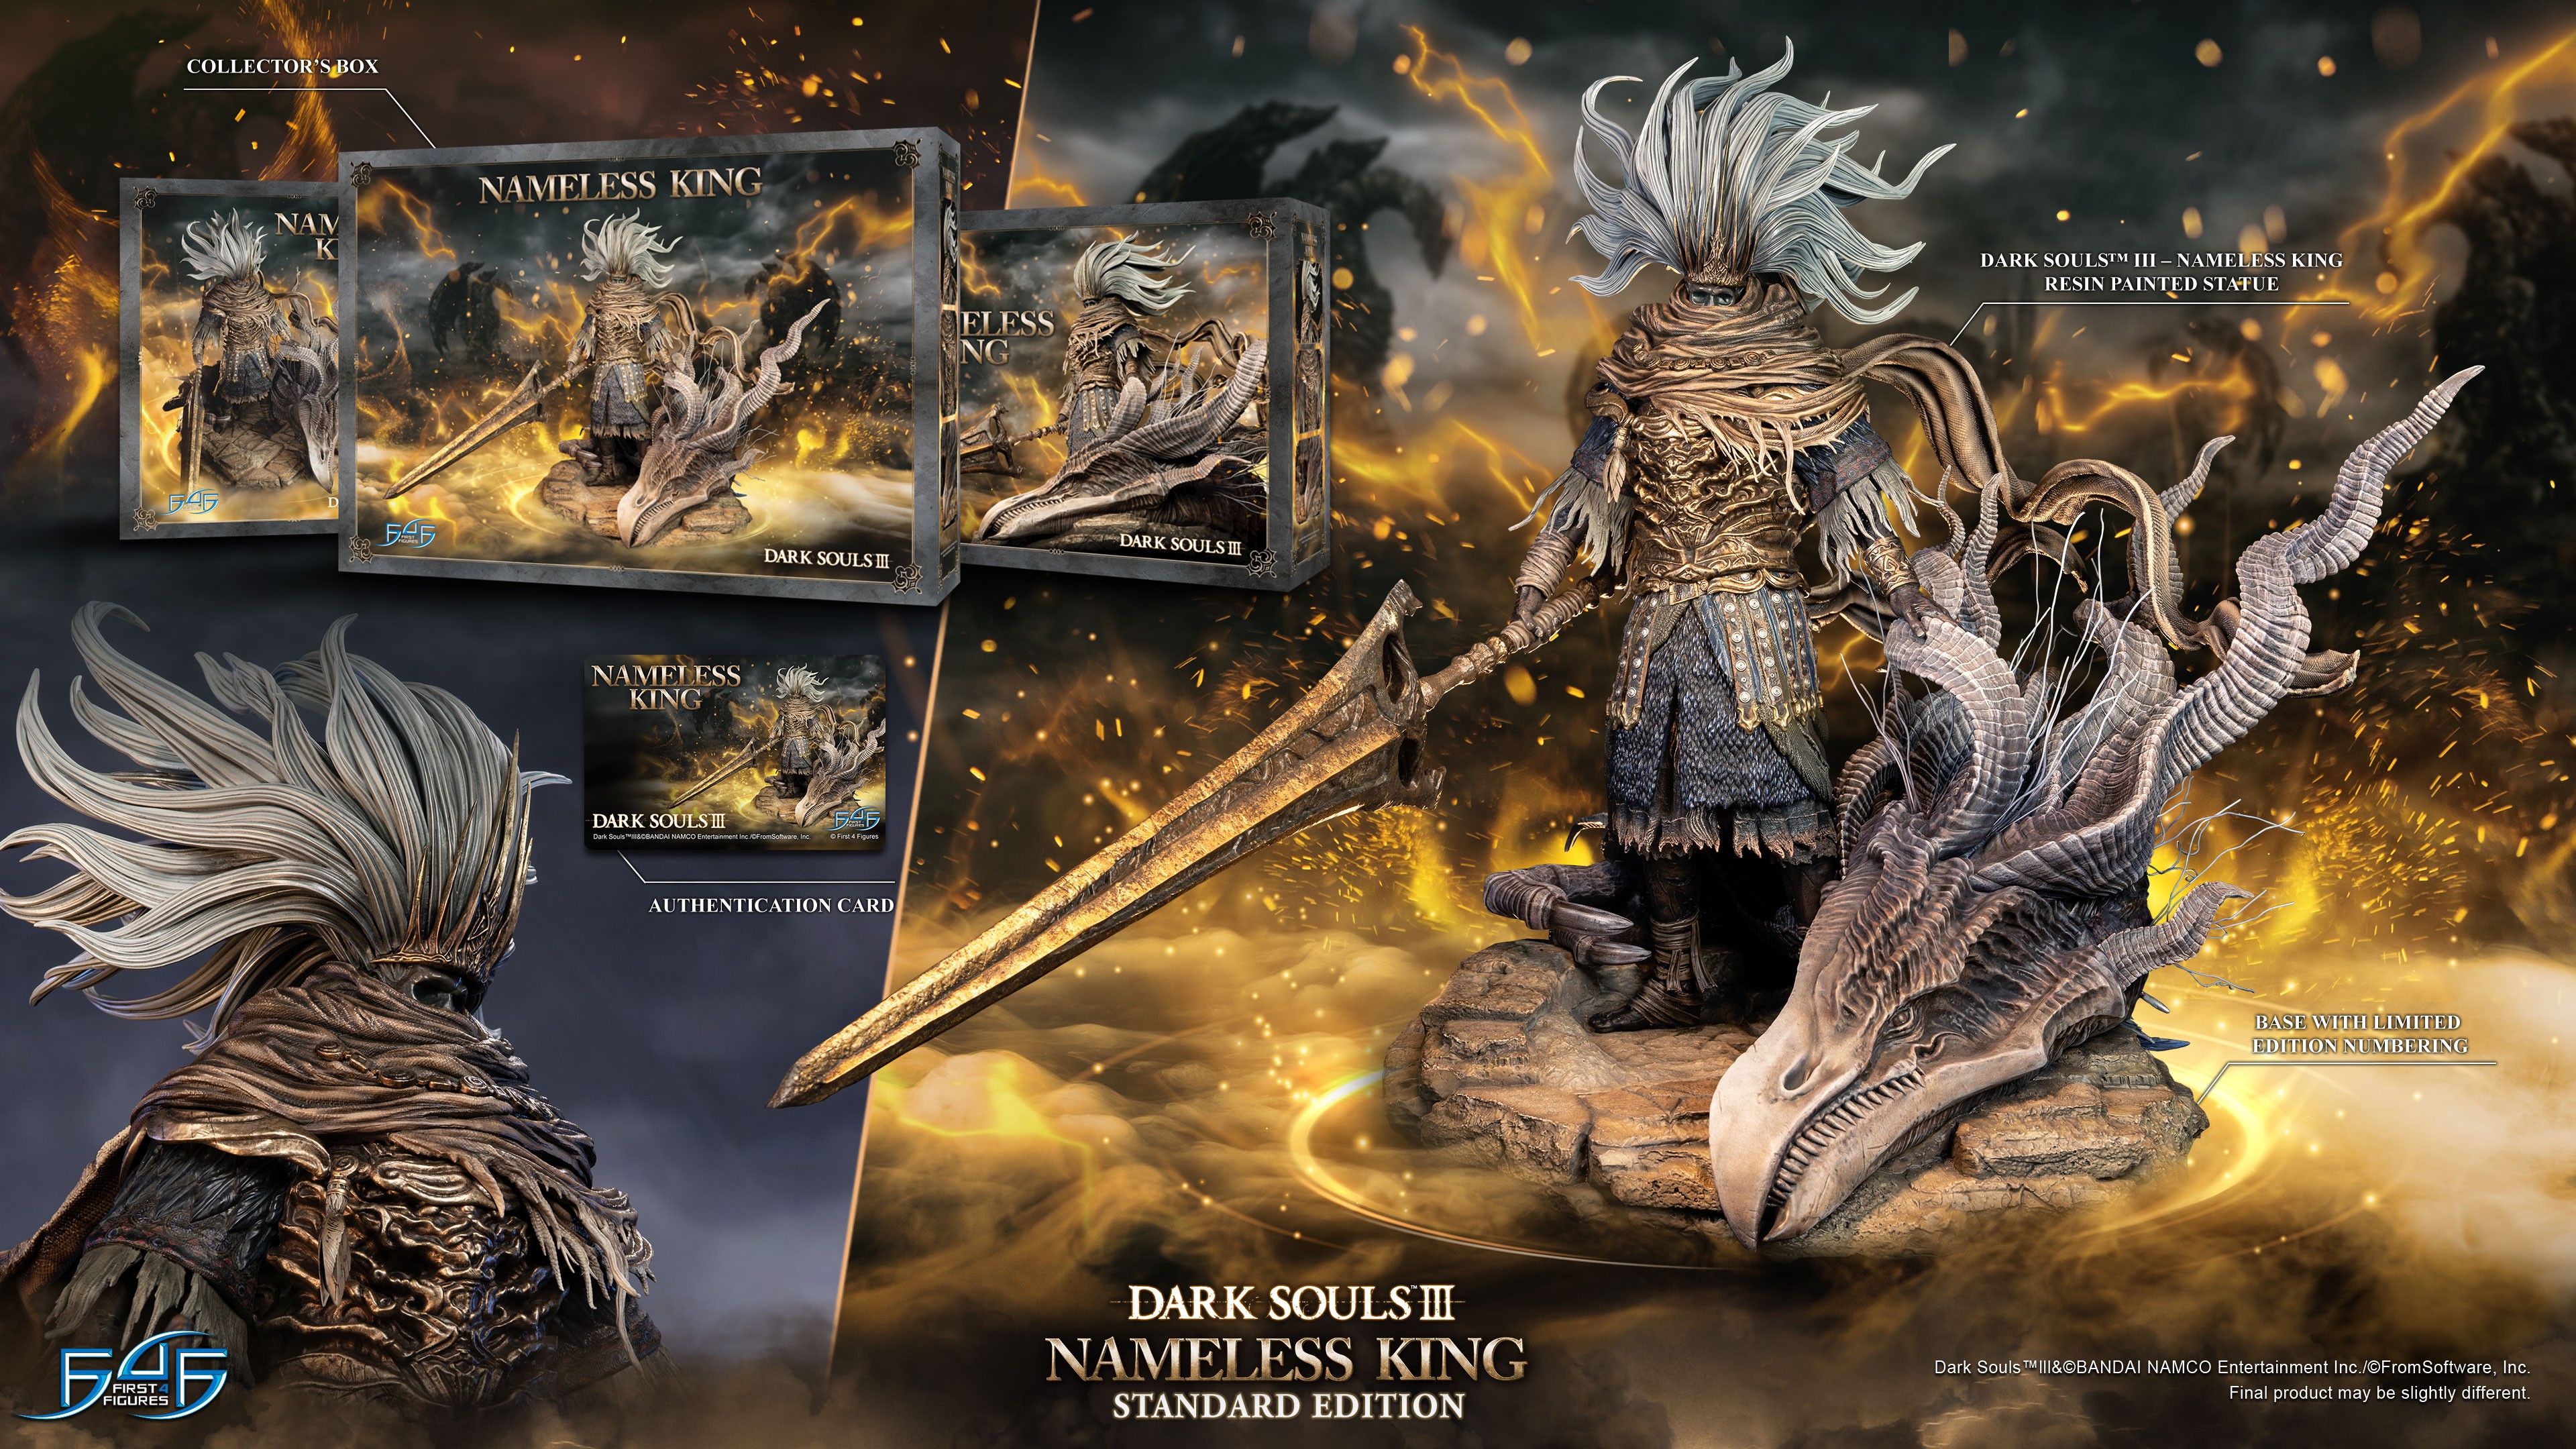 DARK SOUL  III - NAMELESS KING Pre-orders are up at First4Figures $1199.99 - $1275